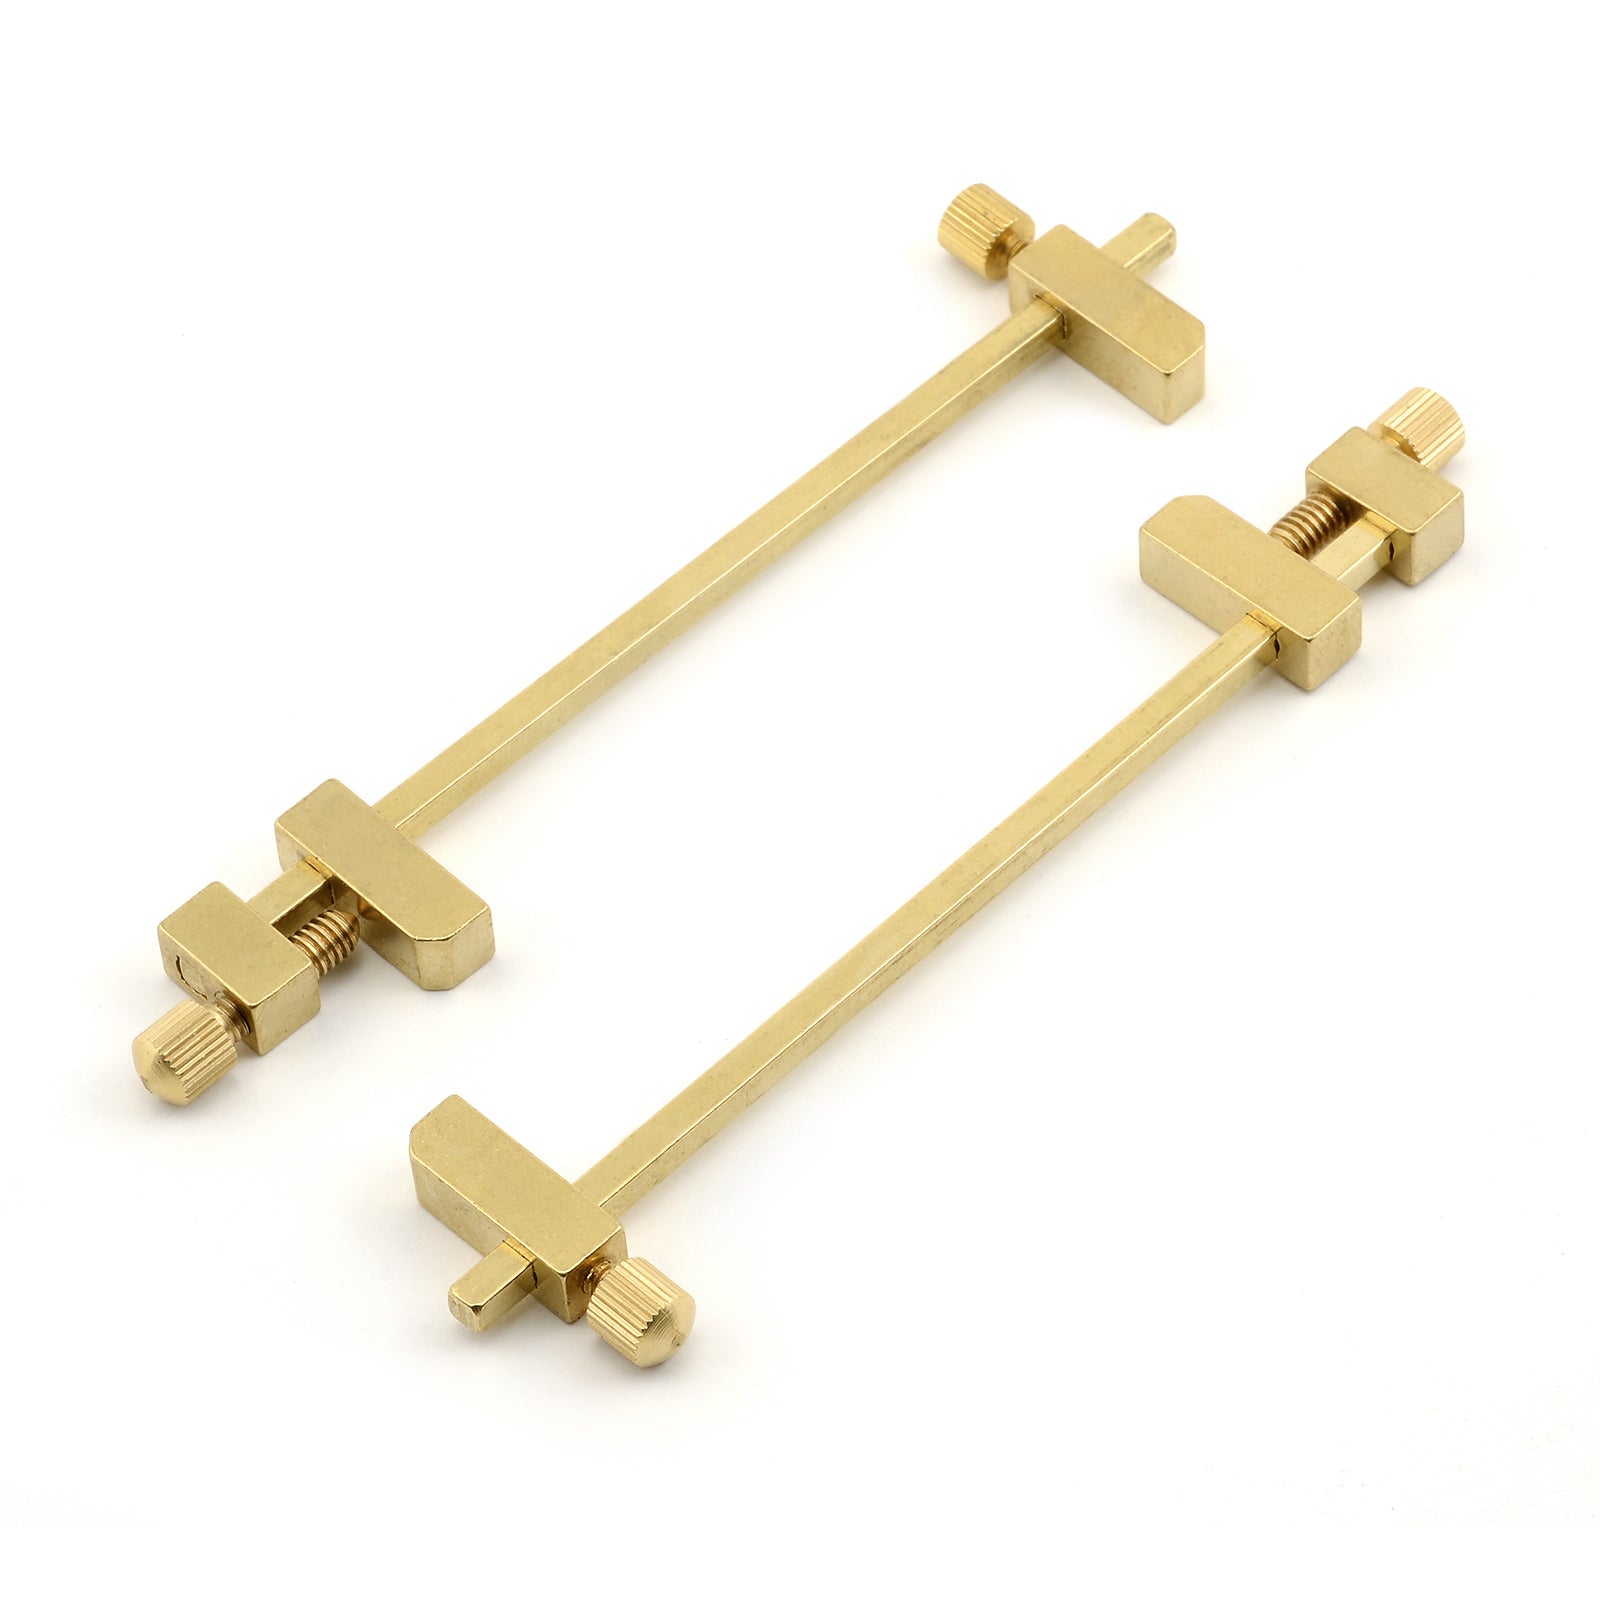 Solid Brass Miniature Bar Clamps, 3-3/4 Inches Long (Set of 2)